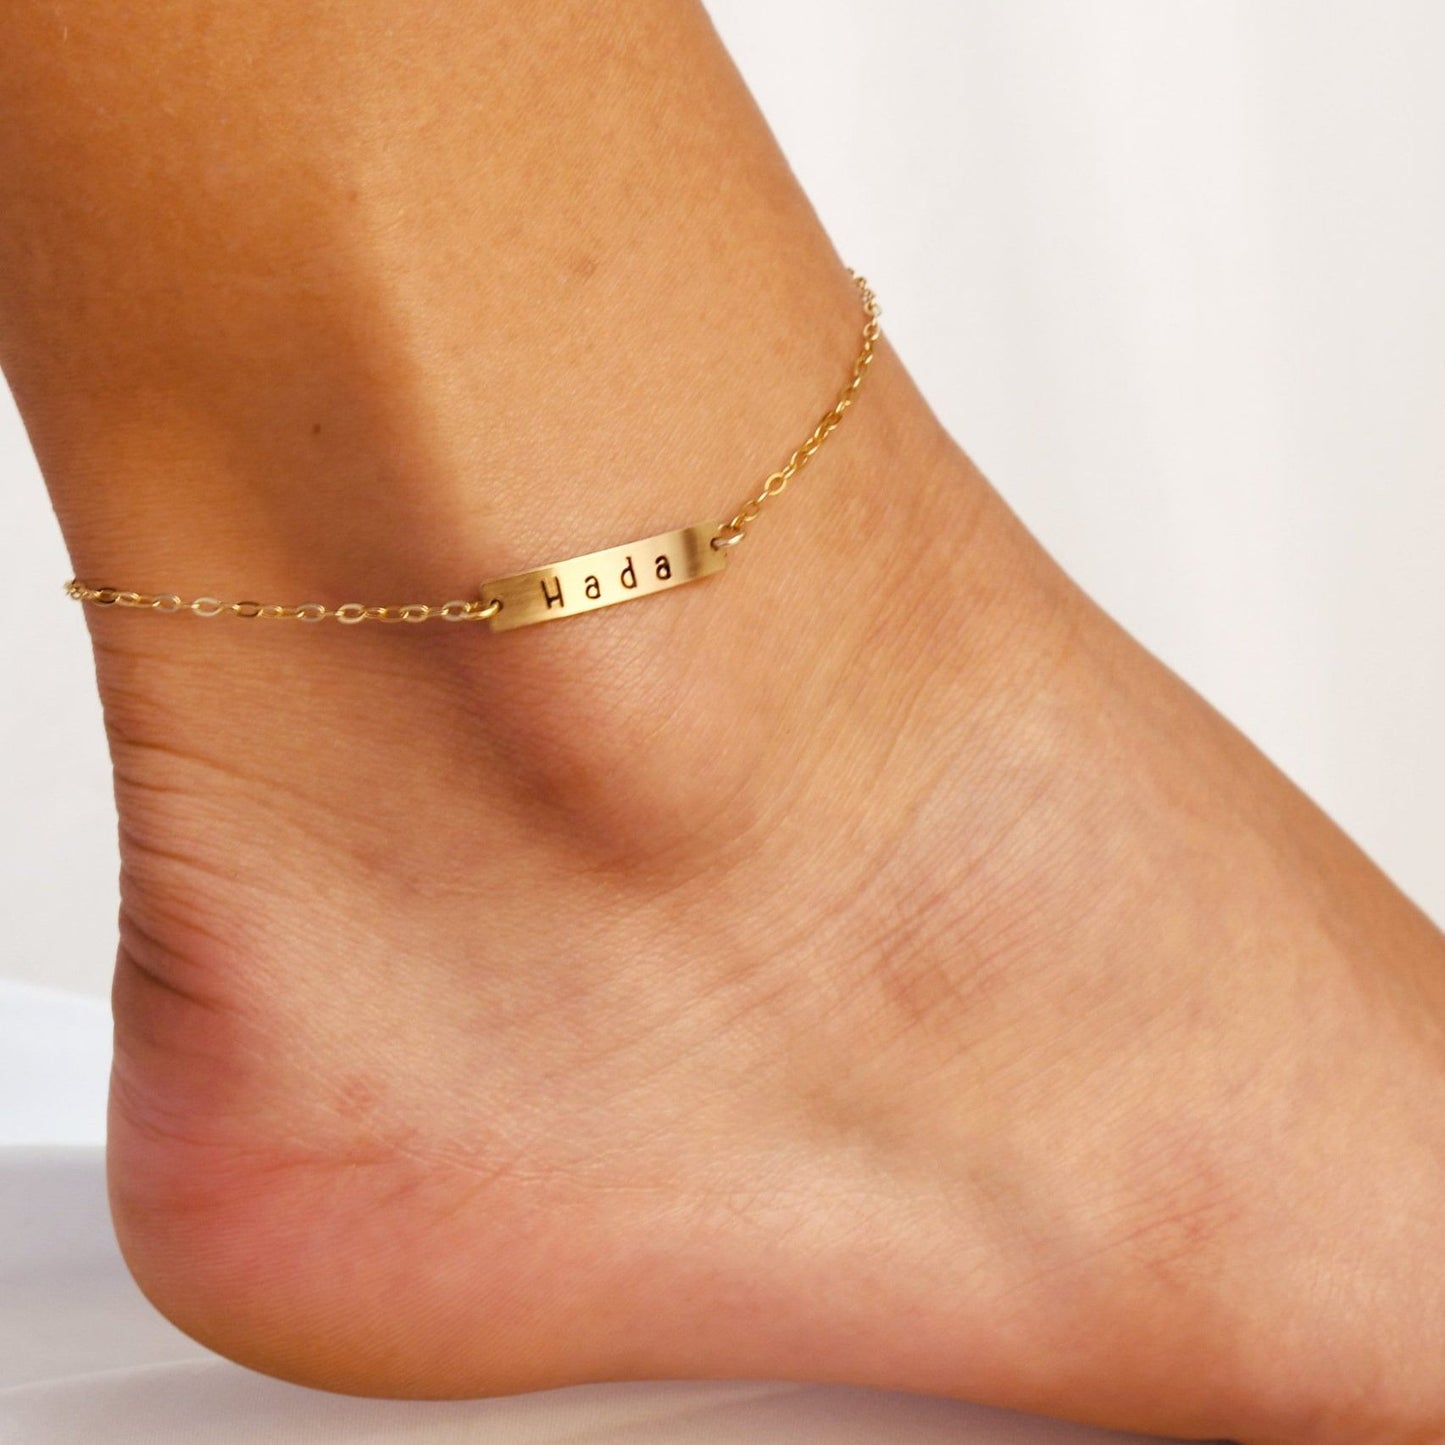 Personalized Anklet - Custom Engraving